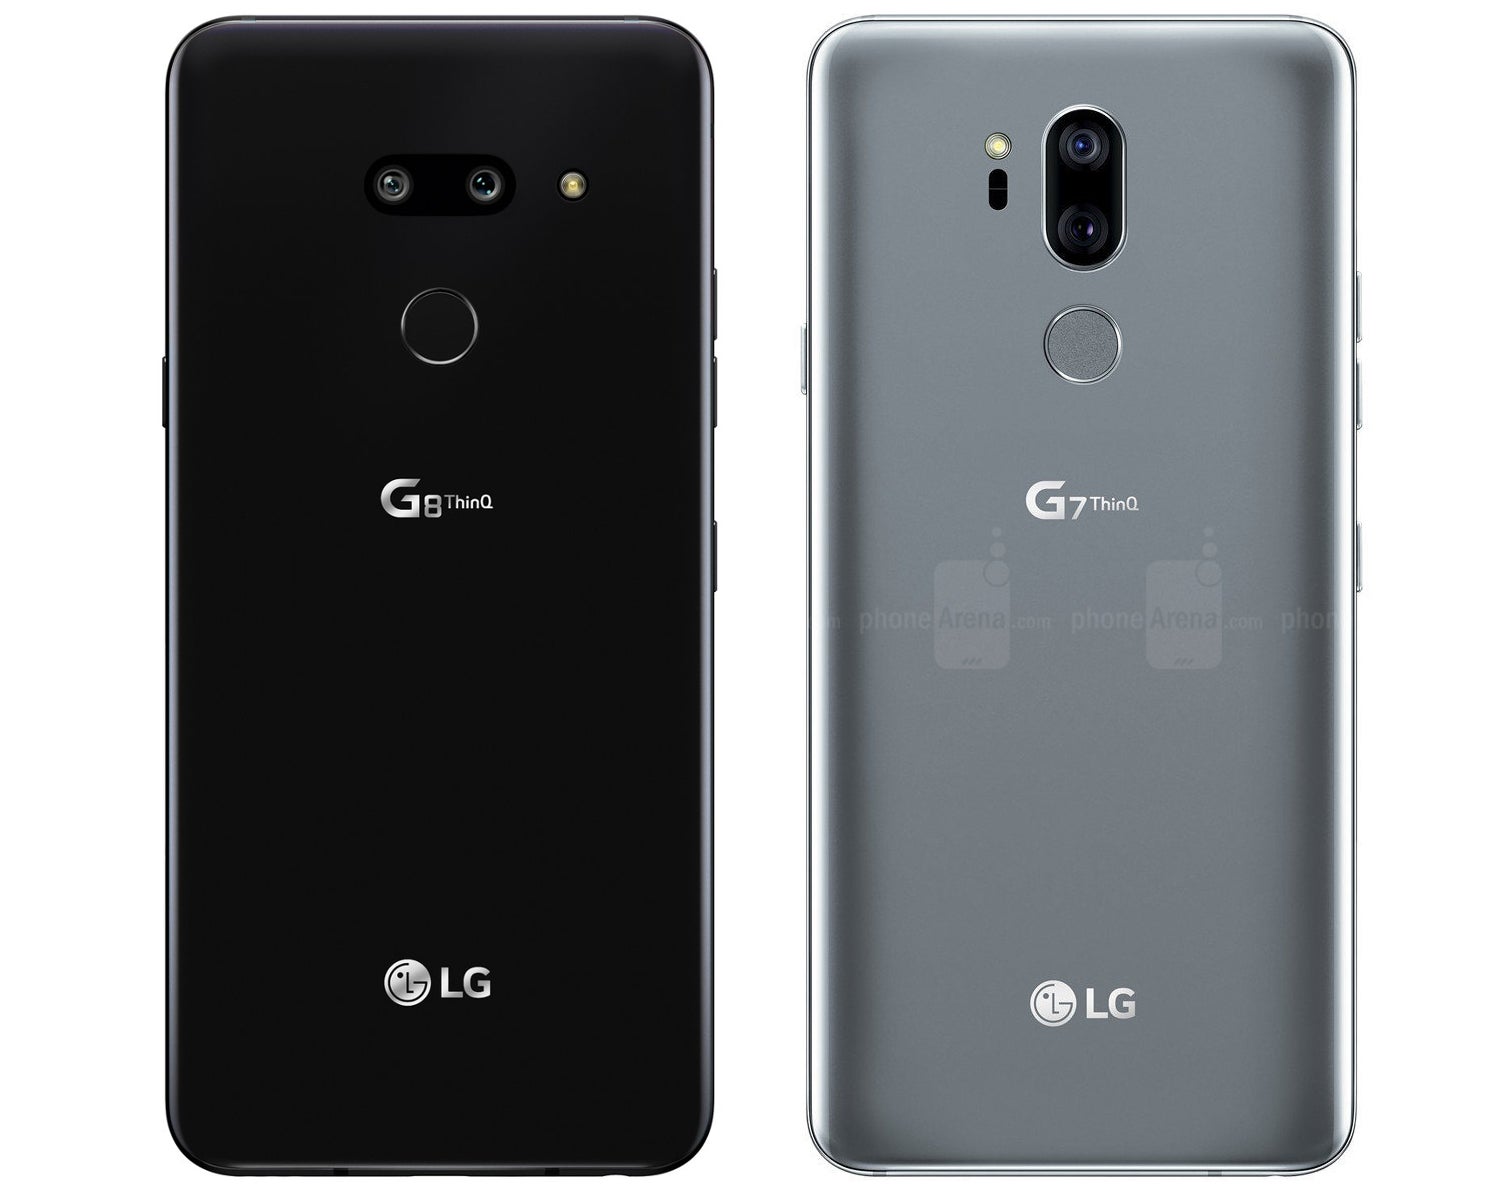 Alleged LG G8 ThinQ vs LG G7 ThinQ - LG G8 ThinQ leaks out in all its glory, cherished feature on board